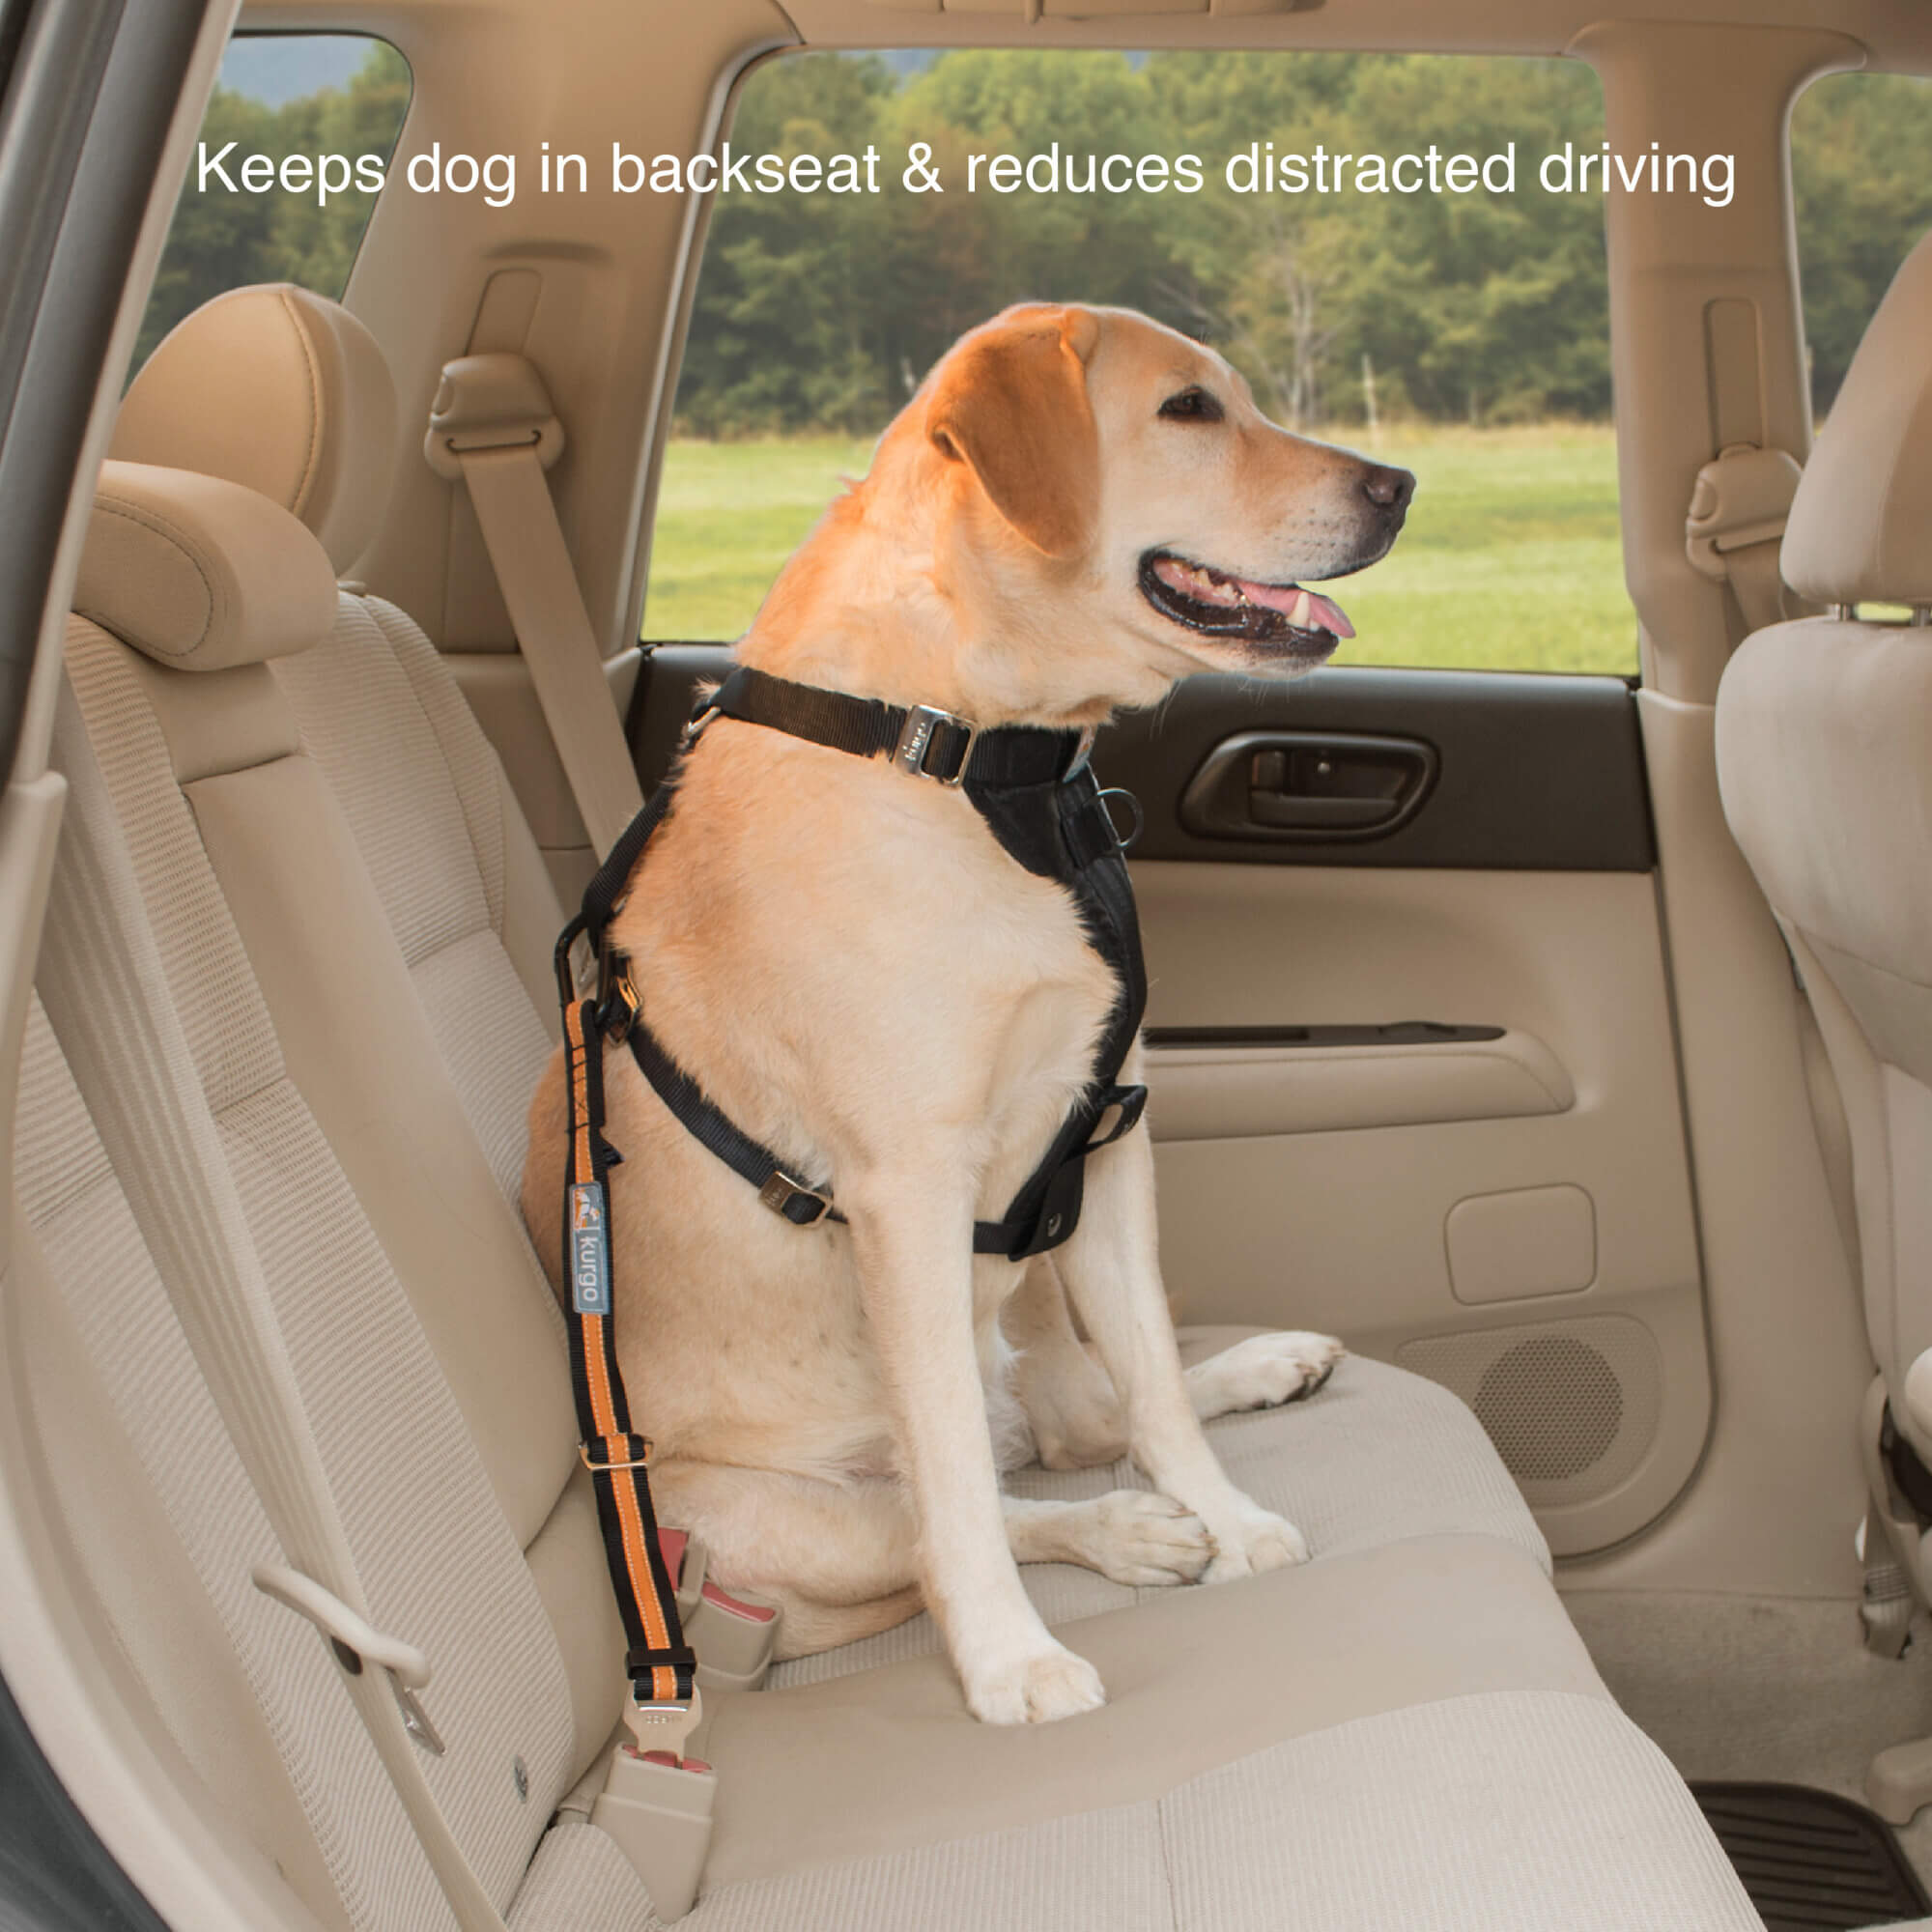 Dog wearing harness clipped into back seat with kurgo direct seatbelt teather